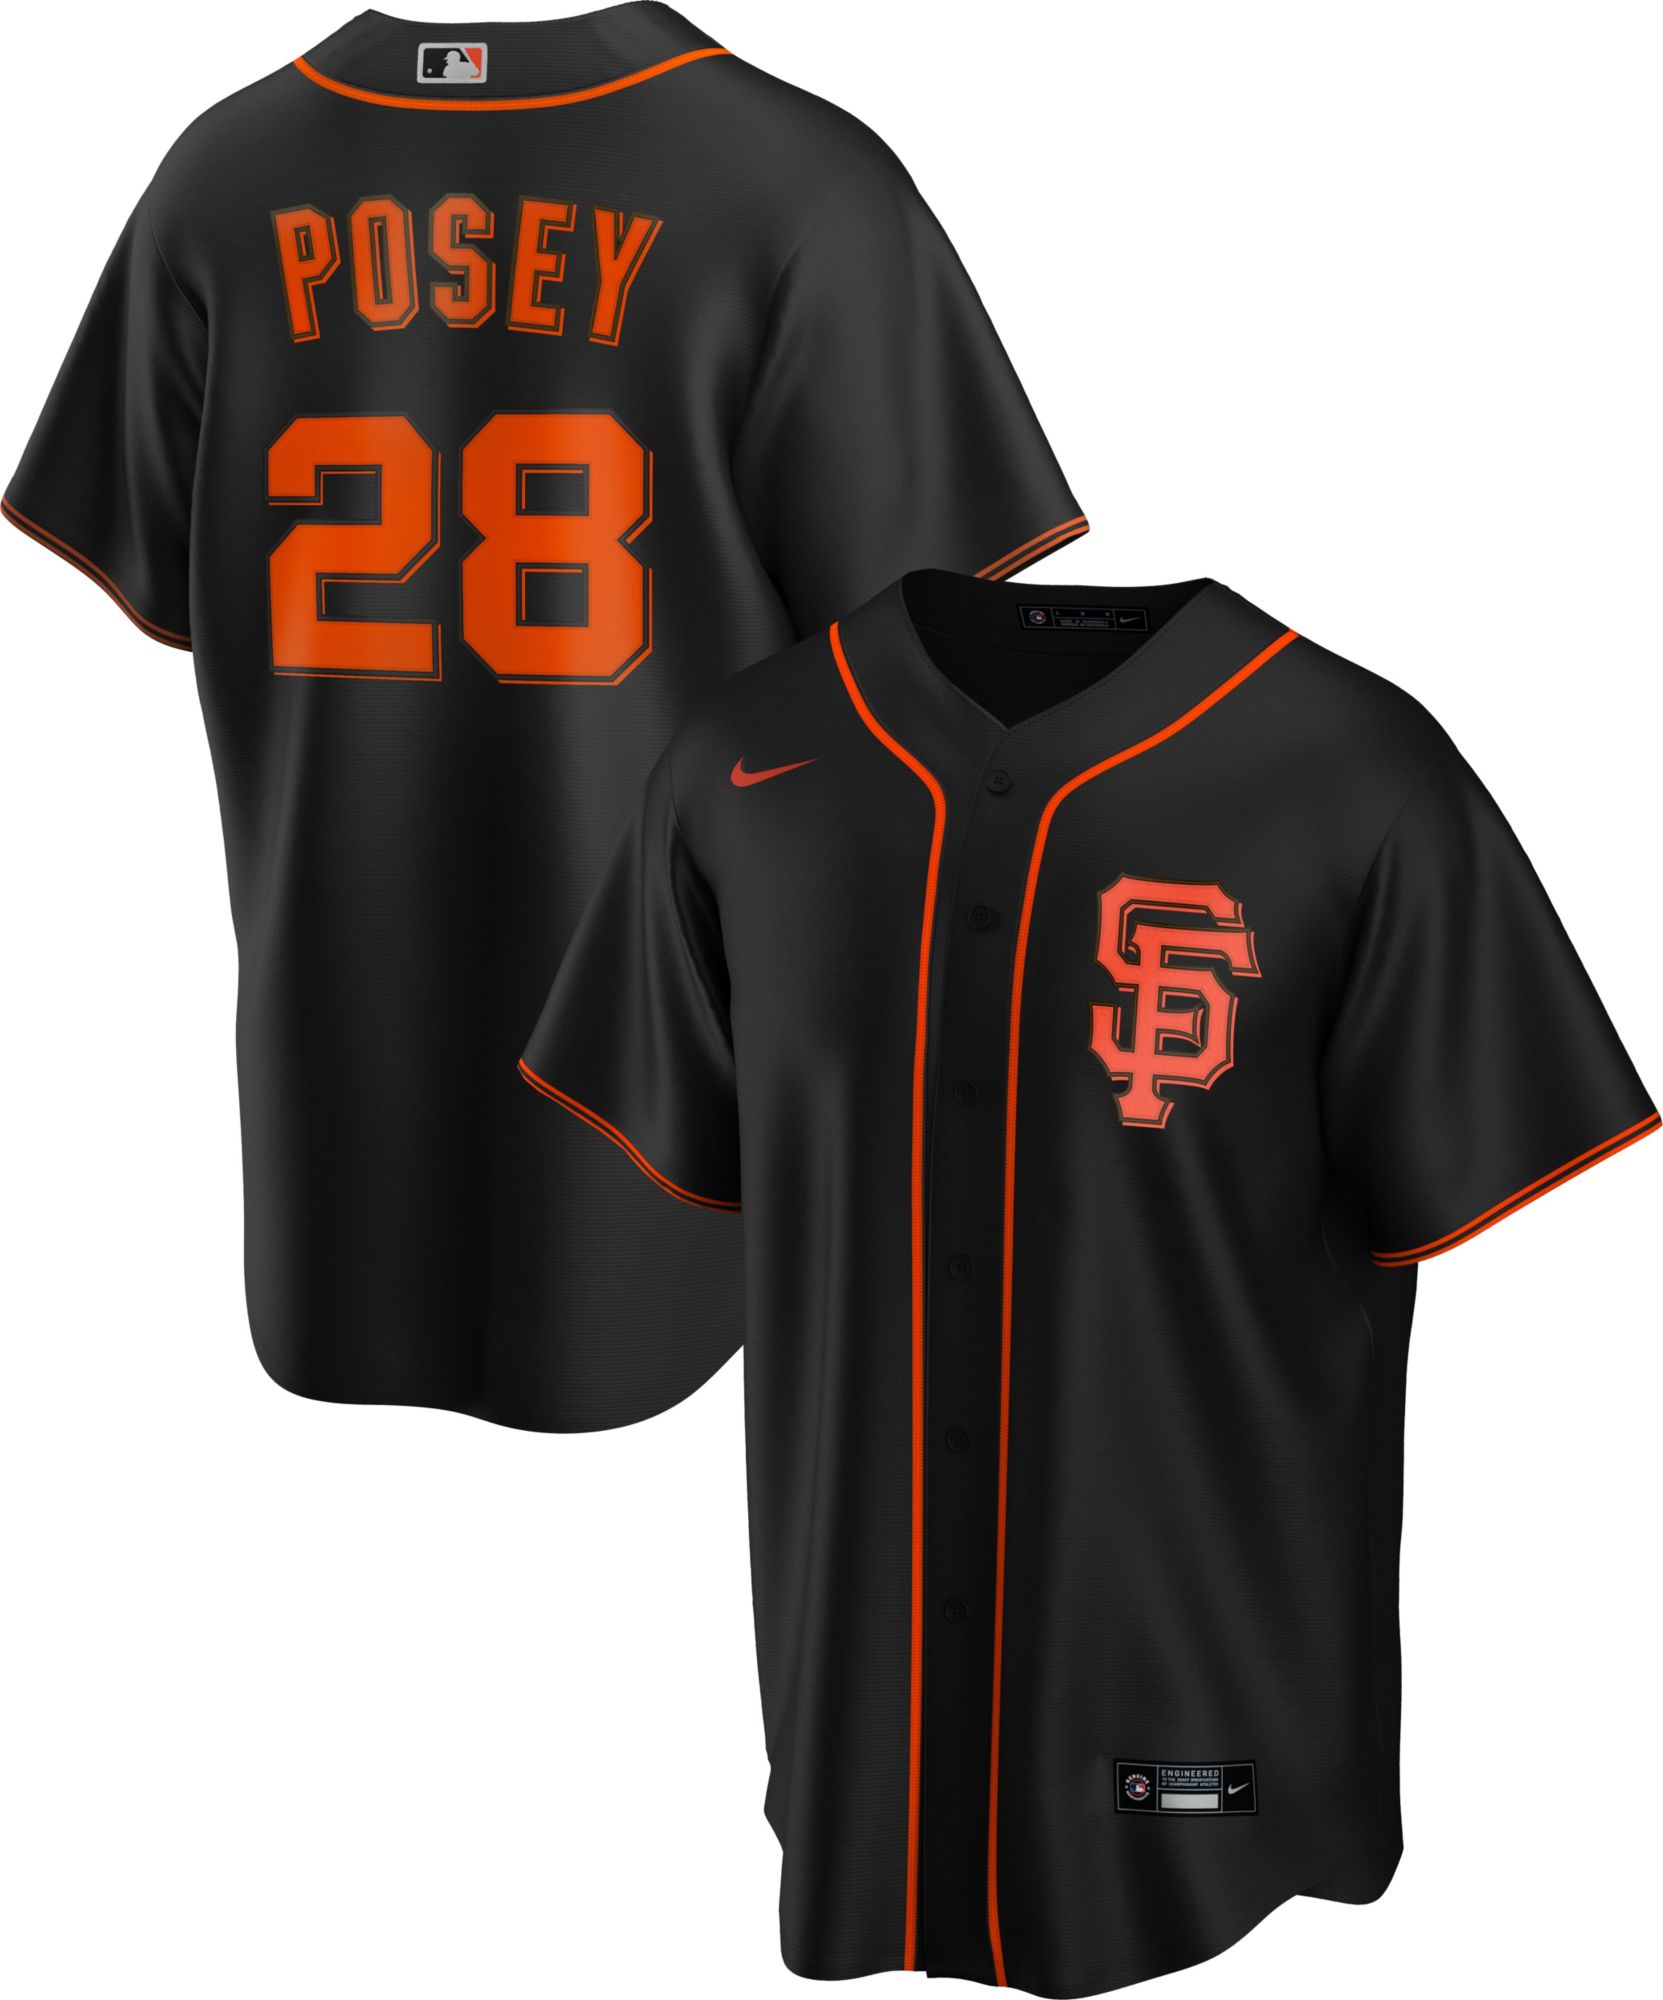 buster posey jersey womens